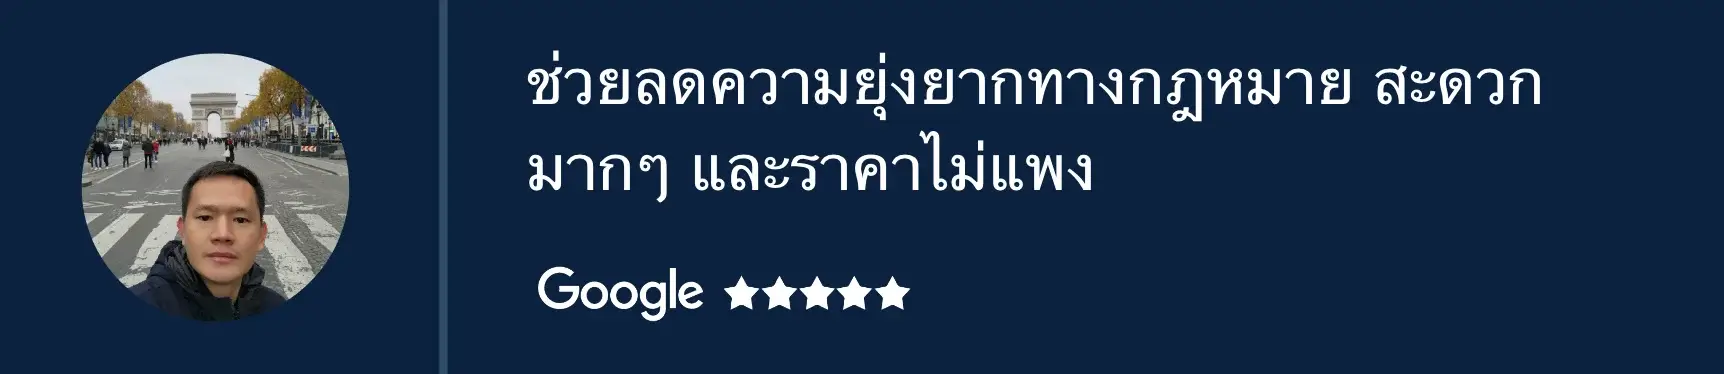 Thailand review 8